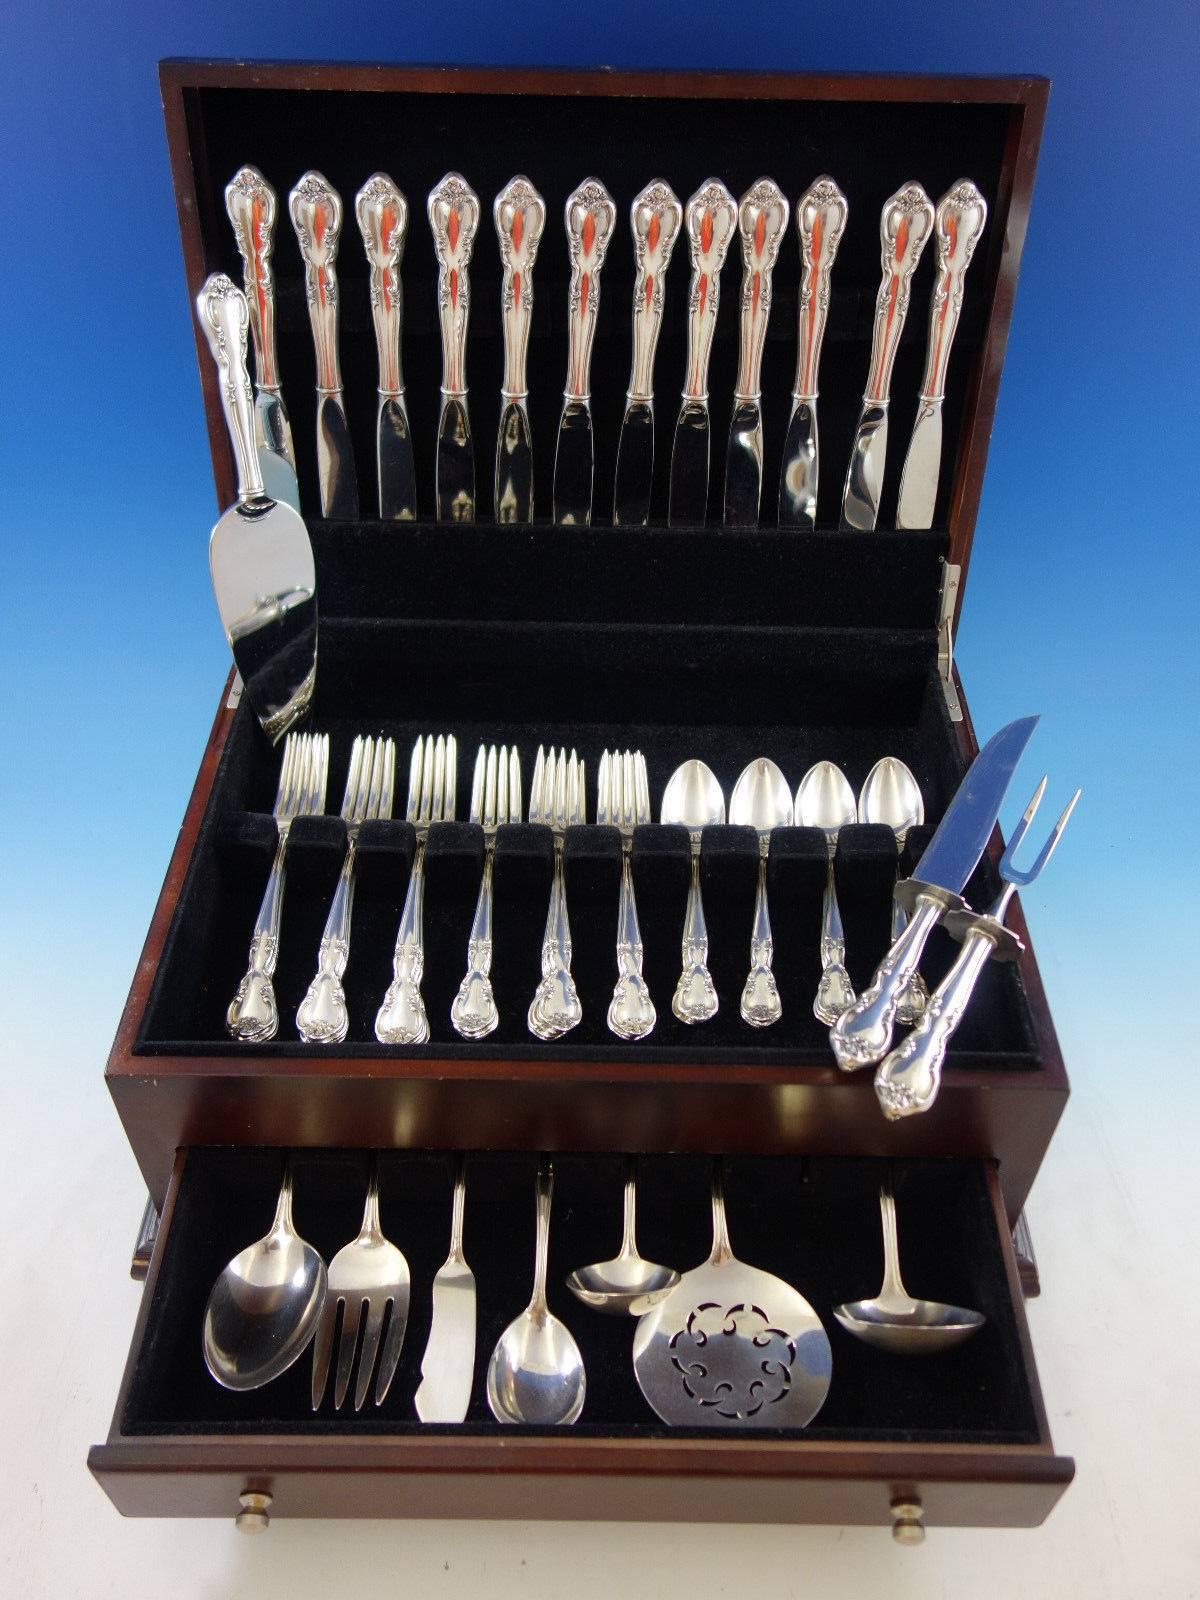 American Classic by Easterling sterling silver Flatware set, 58 pieces. This set includes: 

12 knives, 8 7/8